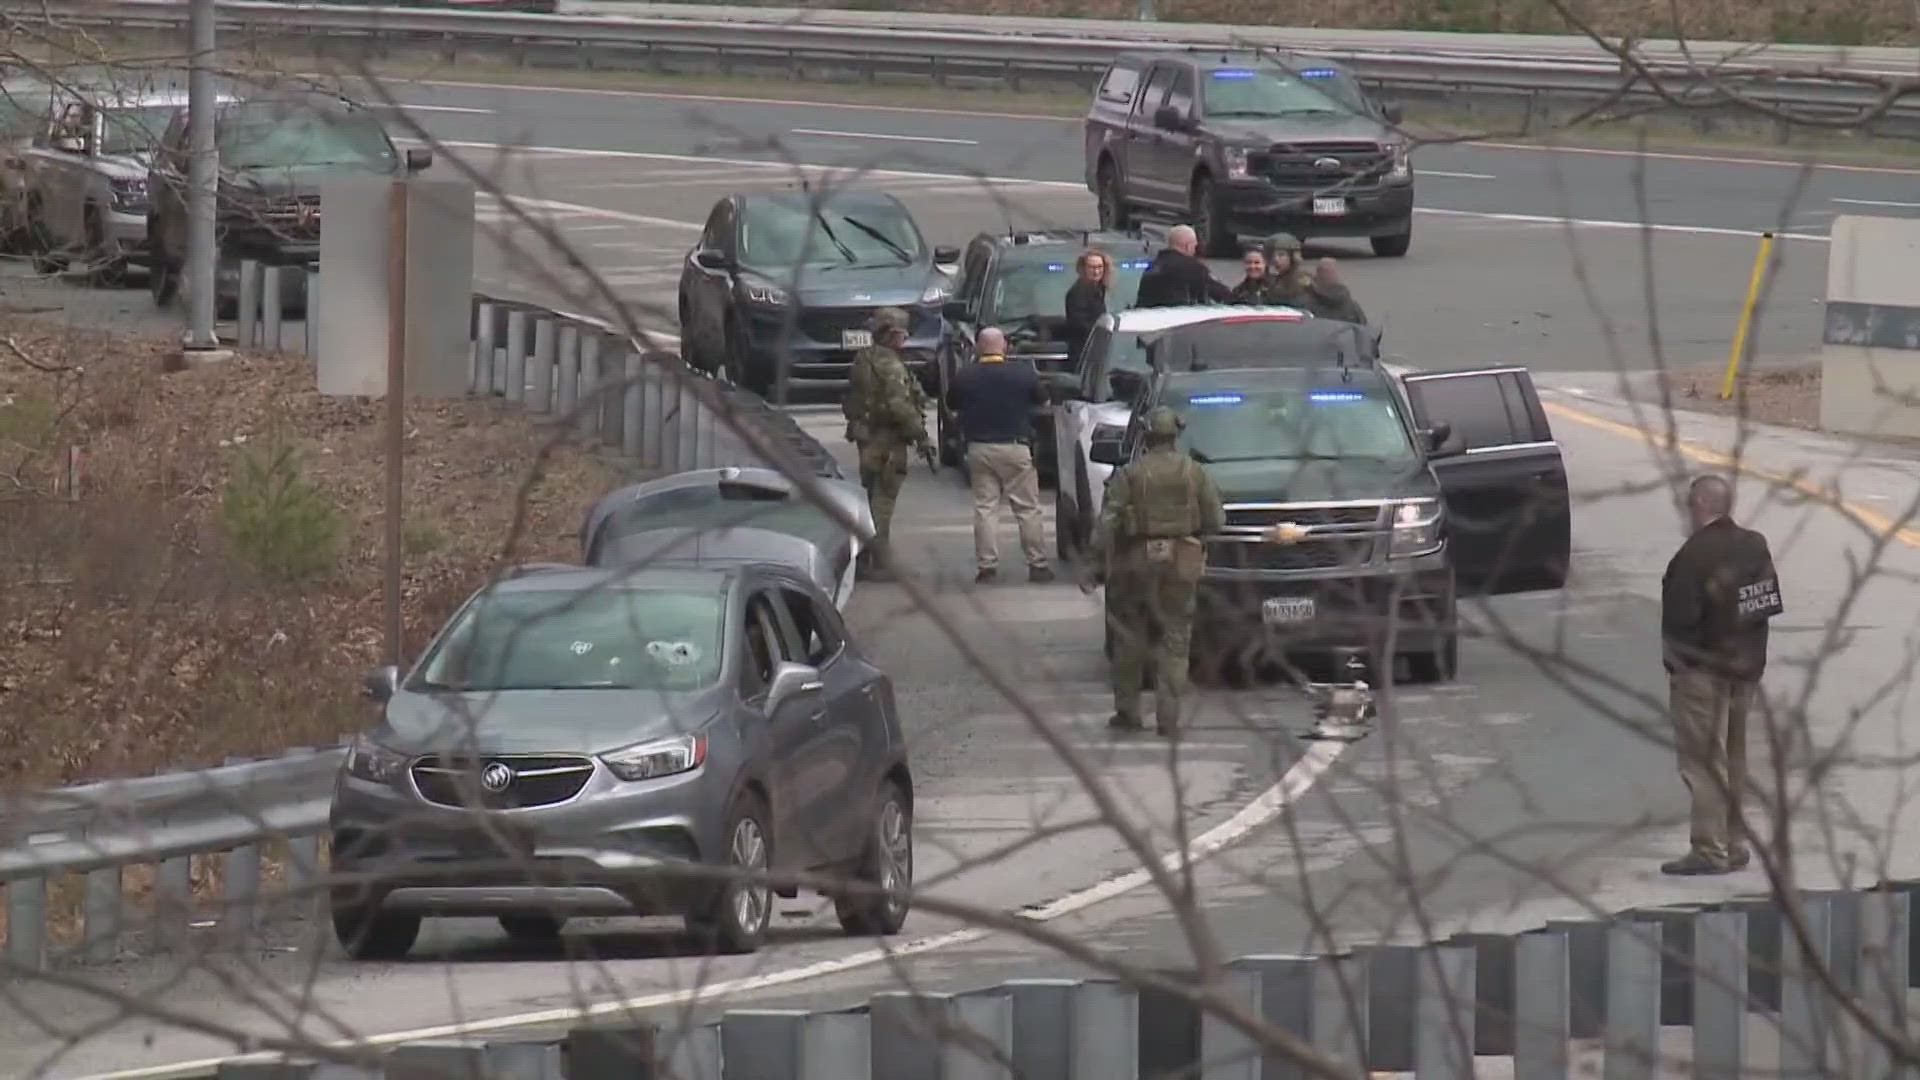 Four bodies were found at a home in Bowdoin, and three people have been injured in a shooting on I-295 in Yarmouth; police believe both incidents are connected.